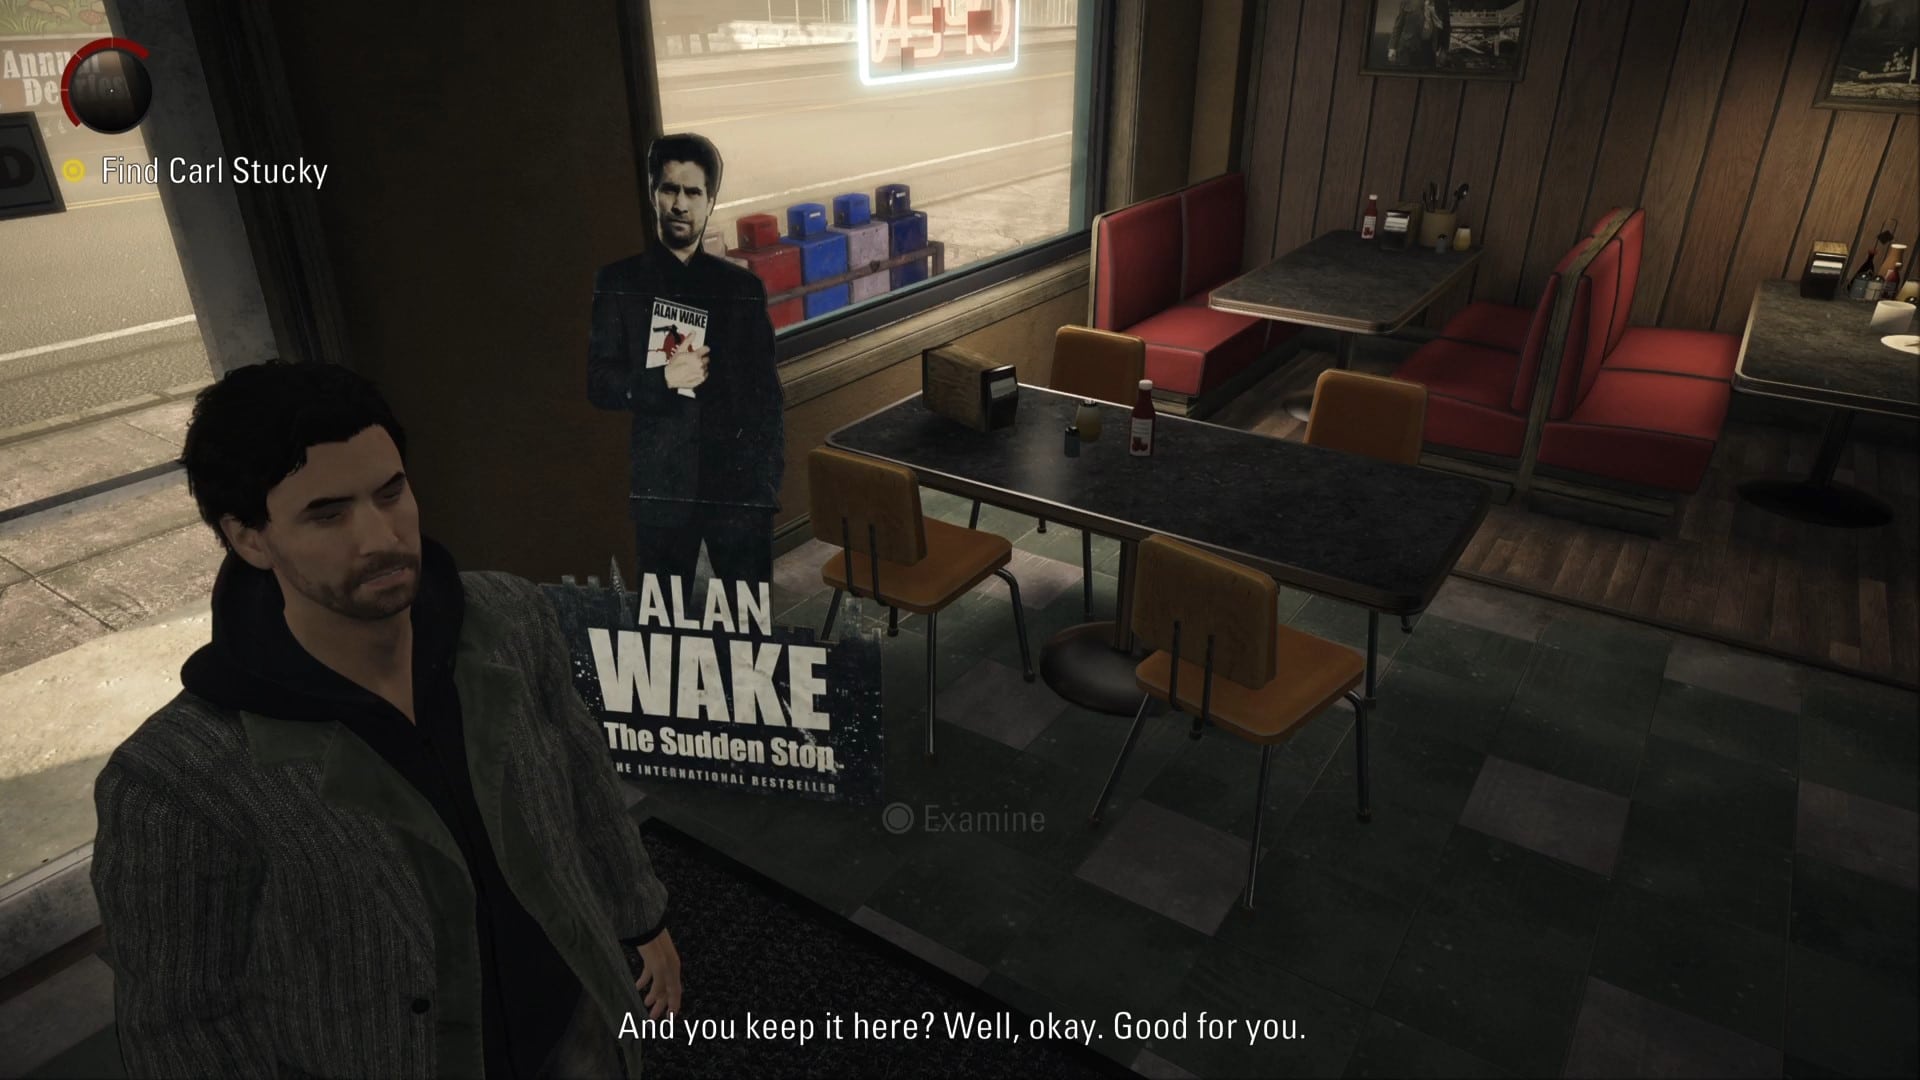 Alan Wake Remastered Review - The Plot Thickens